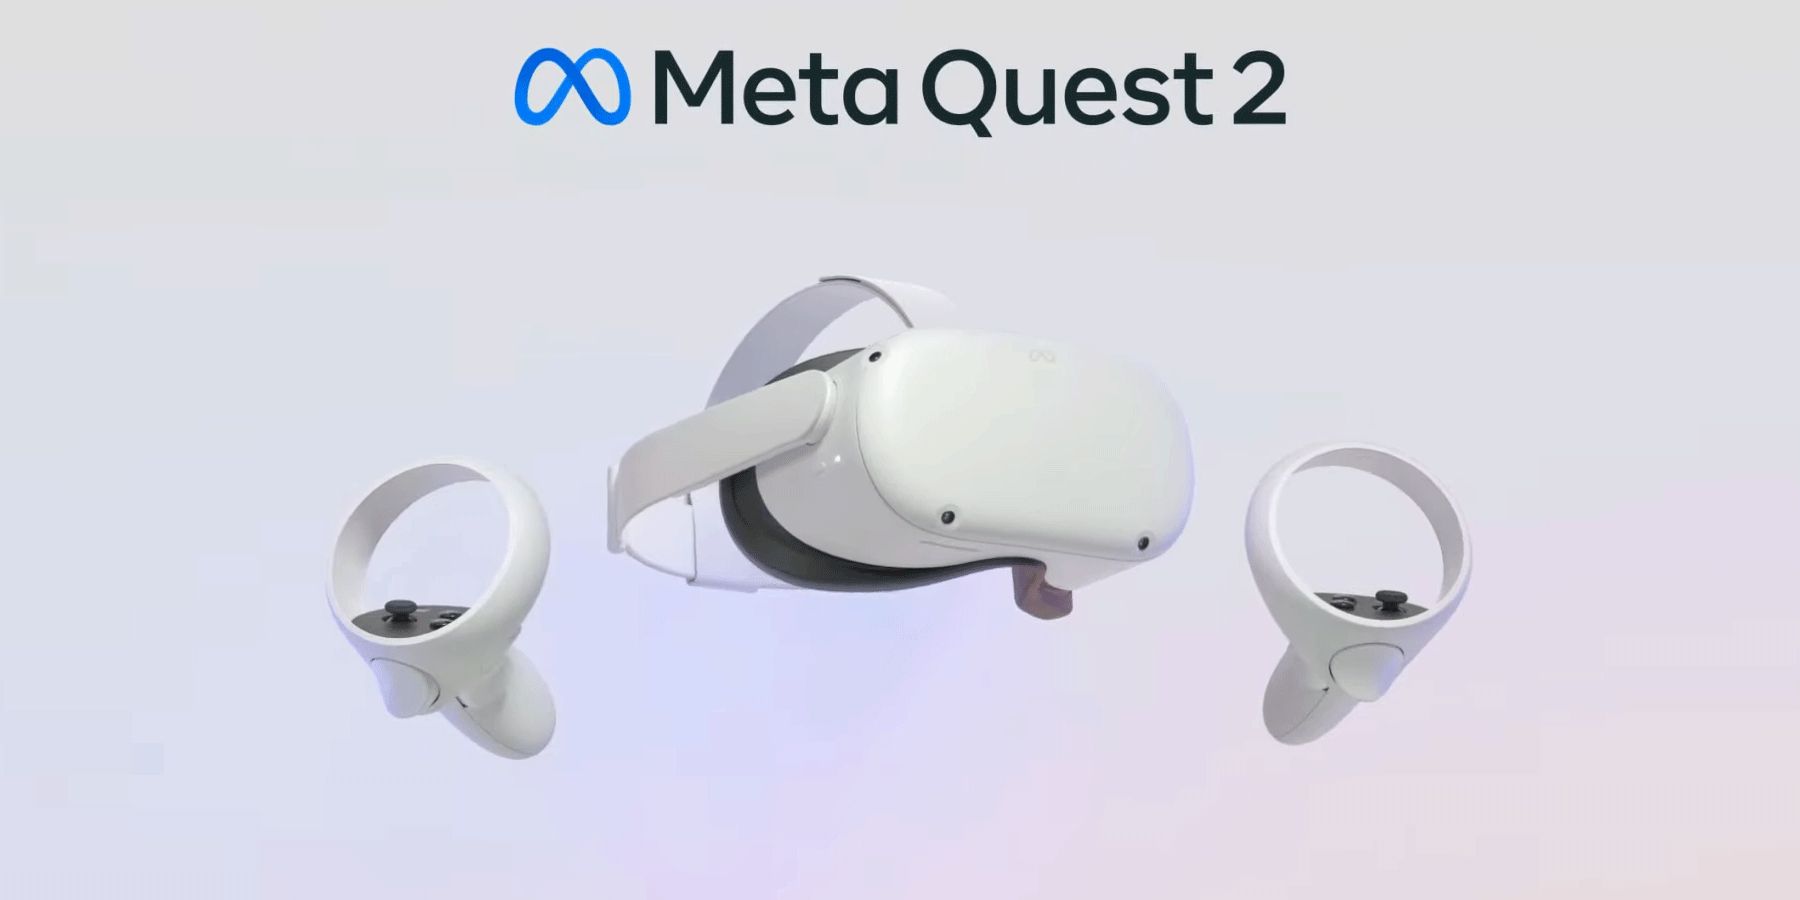 How one can Pair Meta (Oculus) Quest 2 Controllers